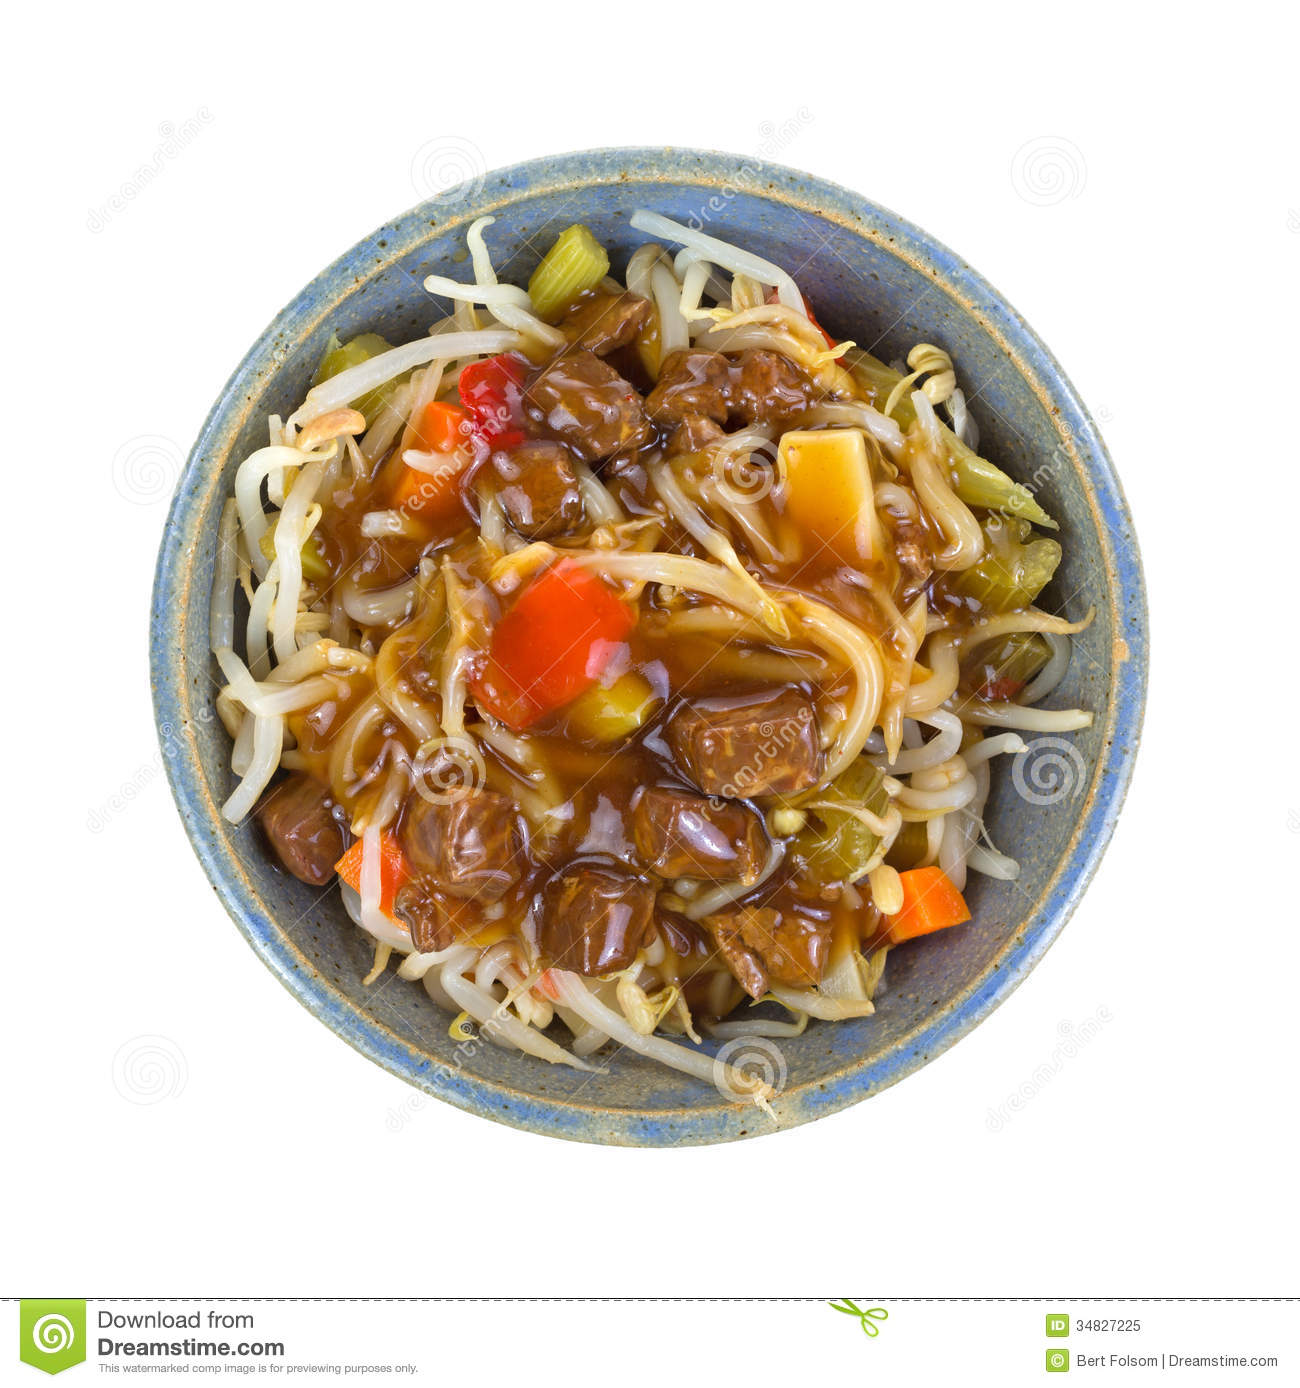 Beef Noodles And Vegetables In Bowl Royalty Free Stock Photo   Image    